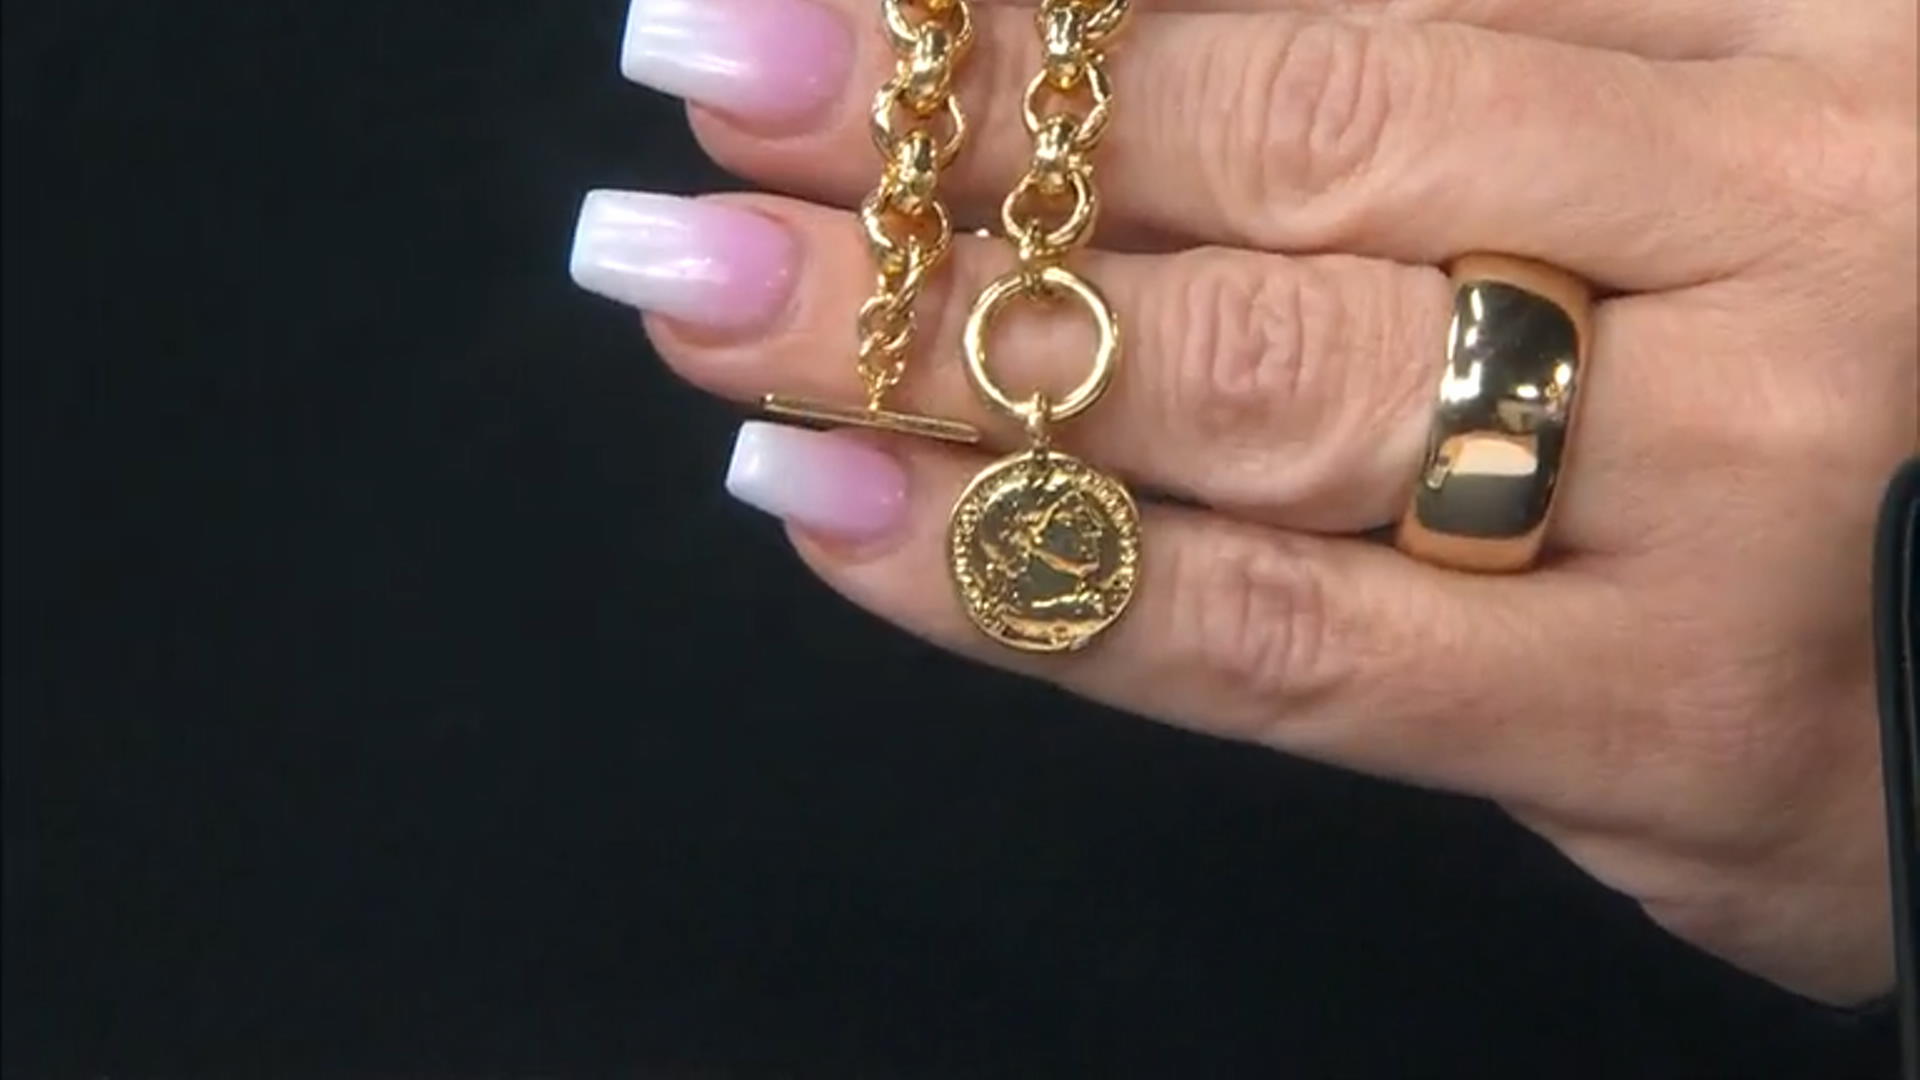 18k Yellow Gold Over Bronze Rolo Link Coin Replica Toggle Bracelet Video Thumbnail